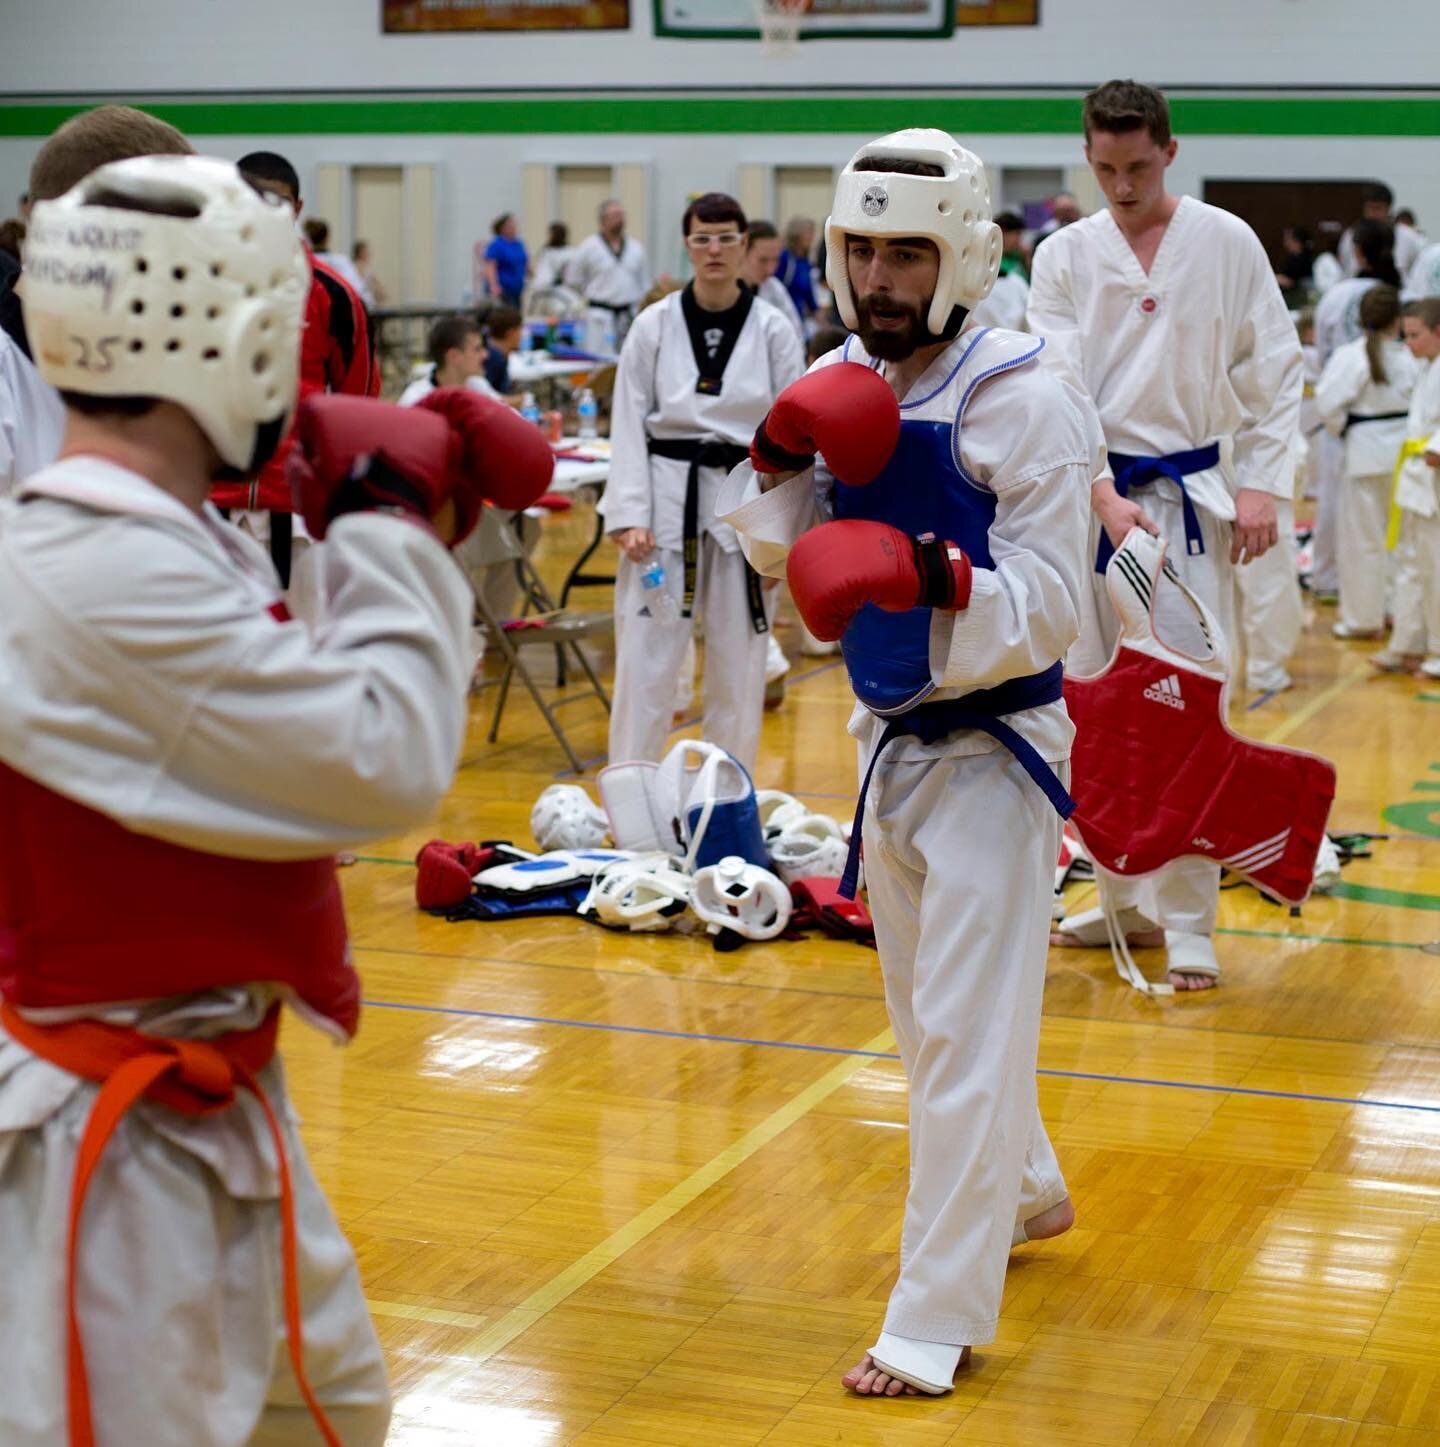 Don&rsquo;t forget we will be sparring today from 1-3pm! Bring your gear and lots of water!